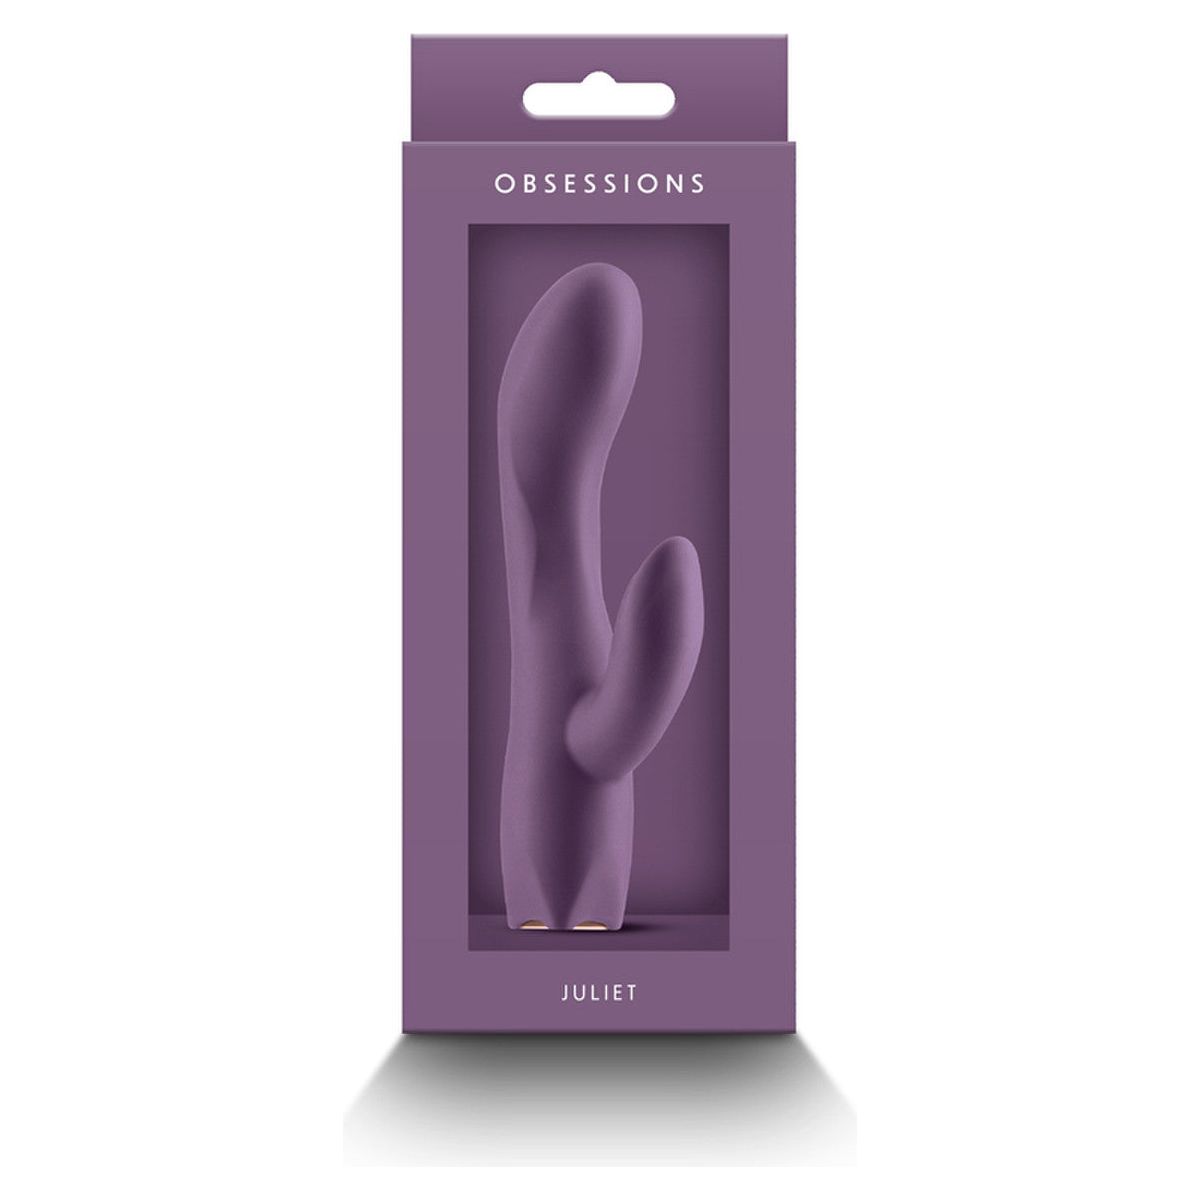 Obsessions “Juliet” Rechargeable Rabbit Vibrator